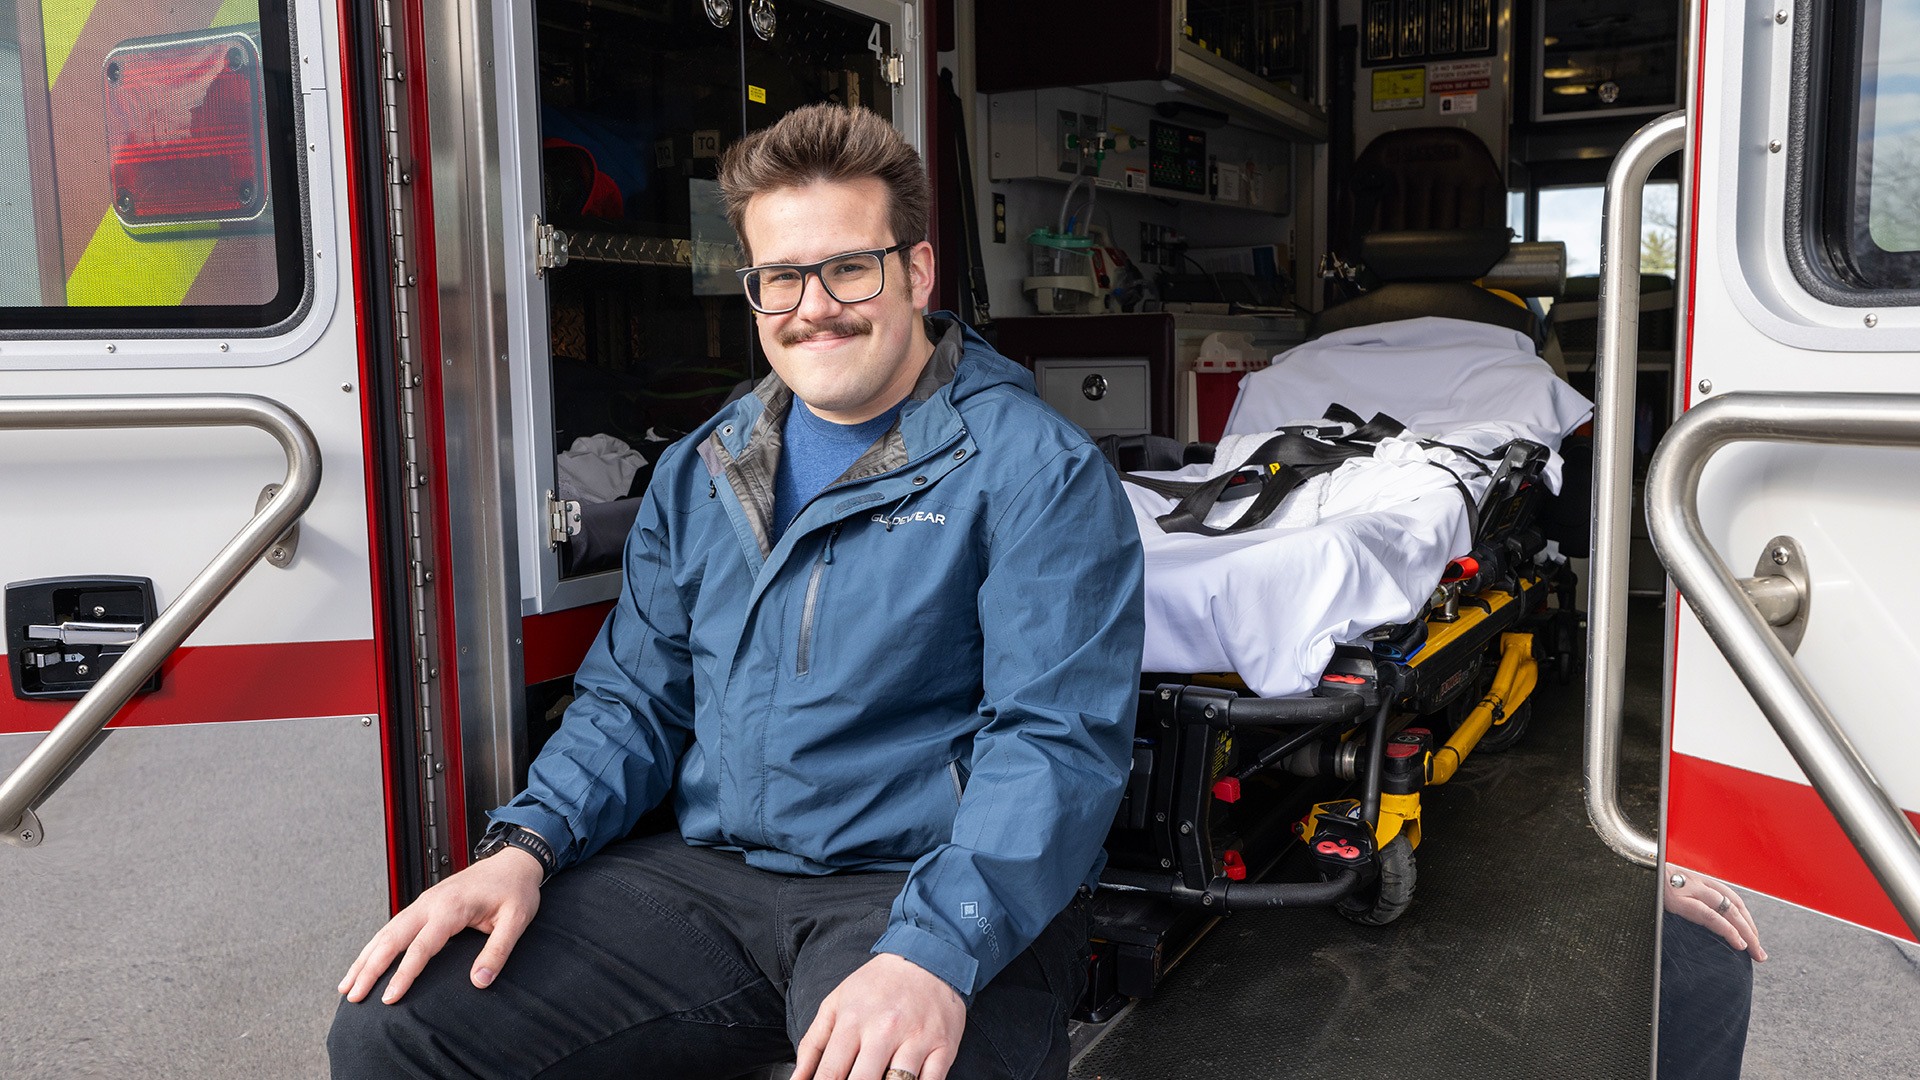 A person smiles while sitting in the back of an ambulance.